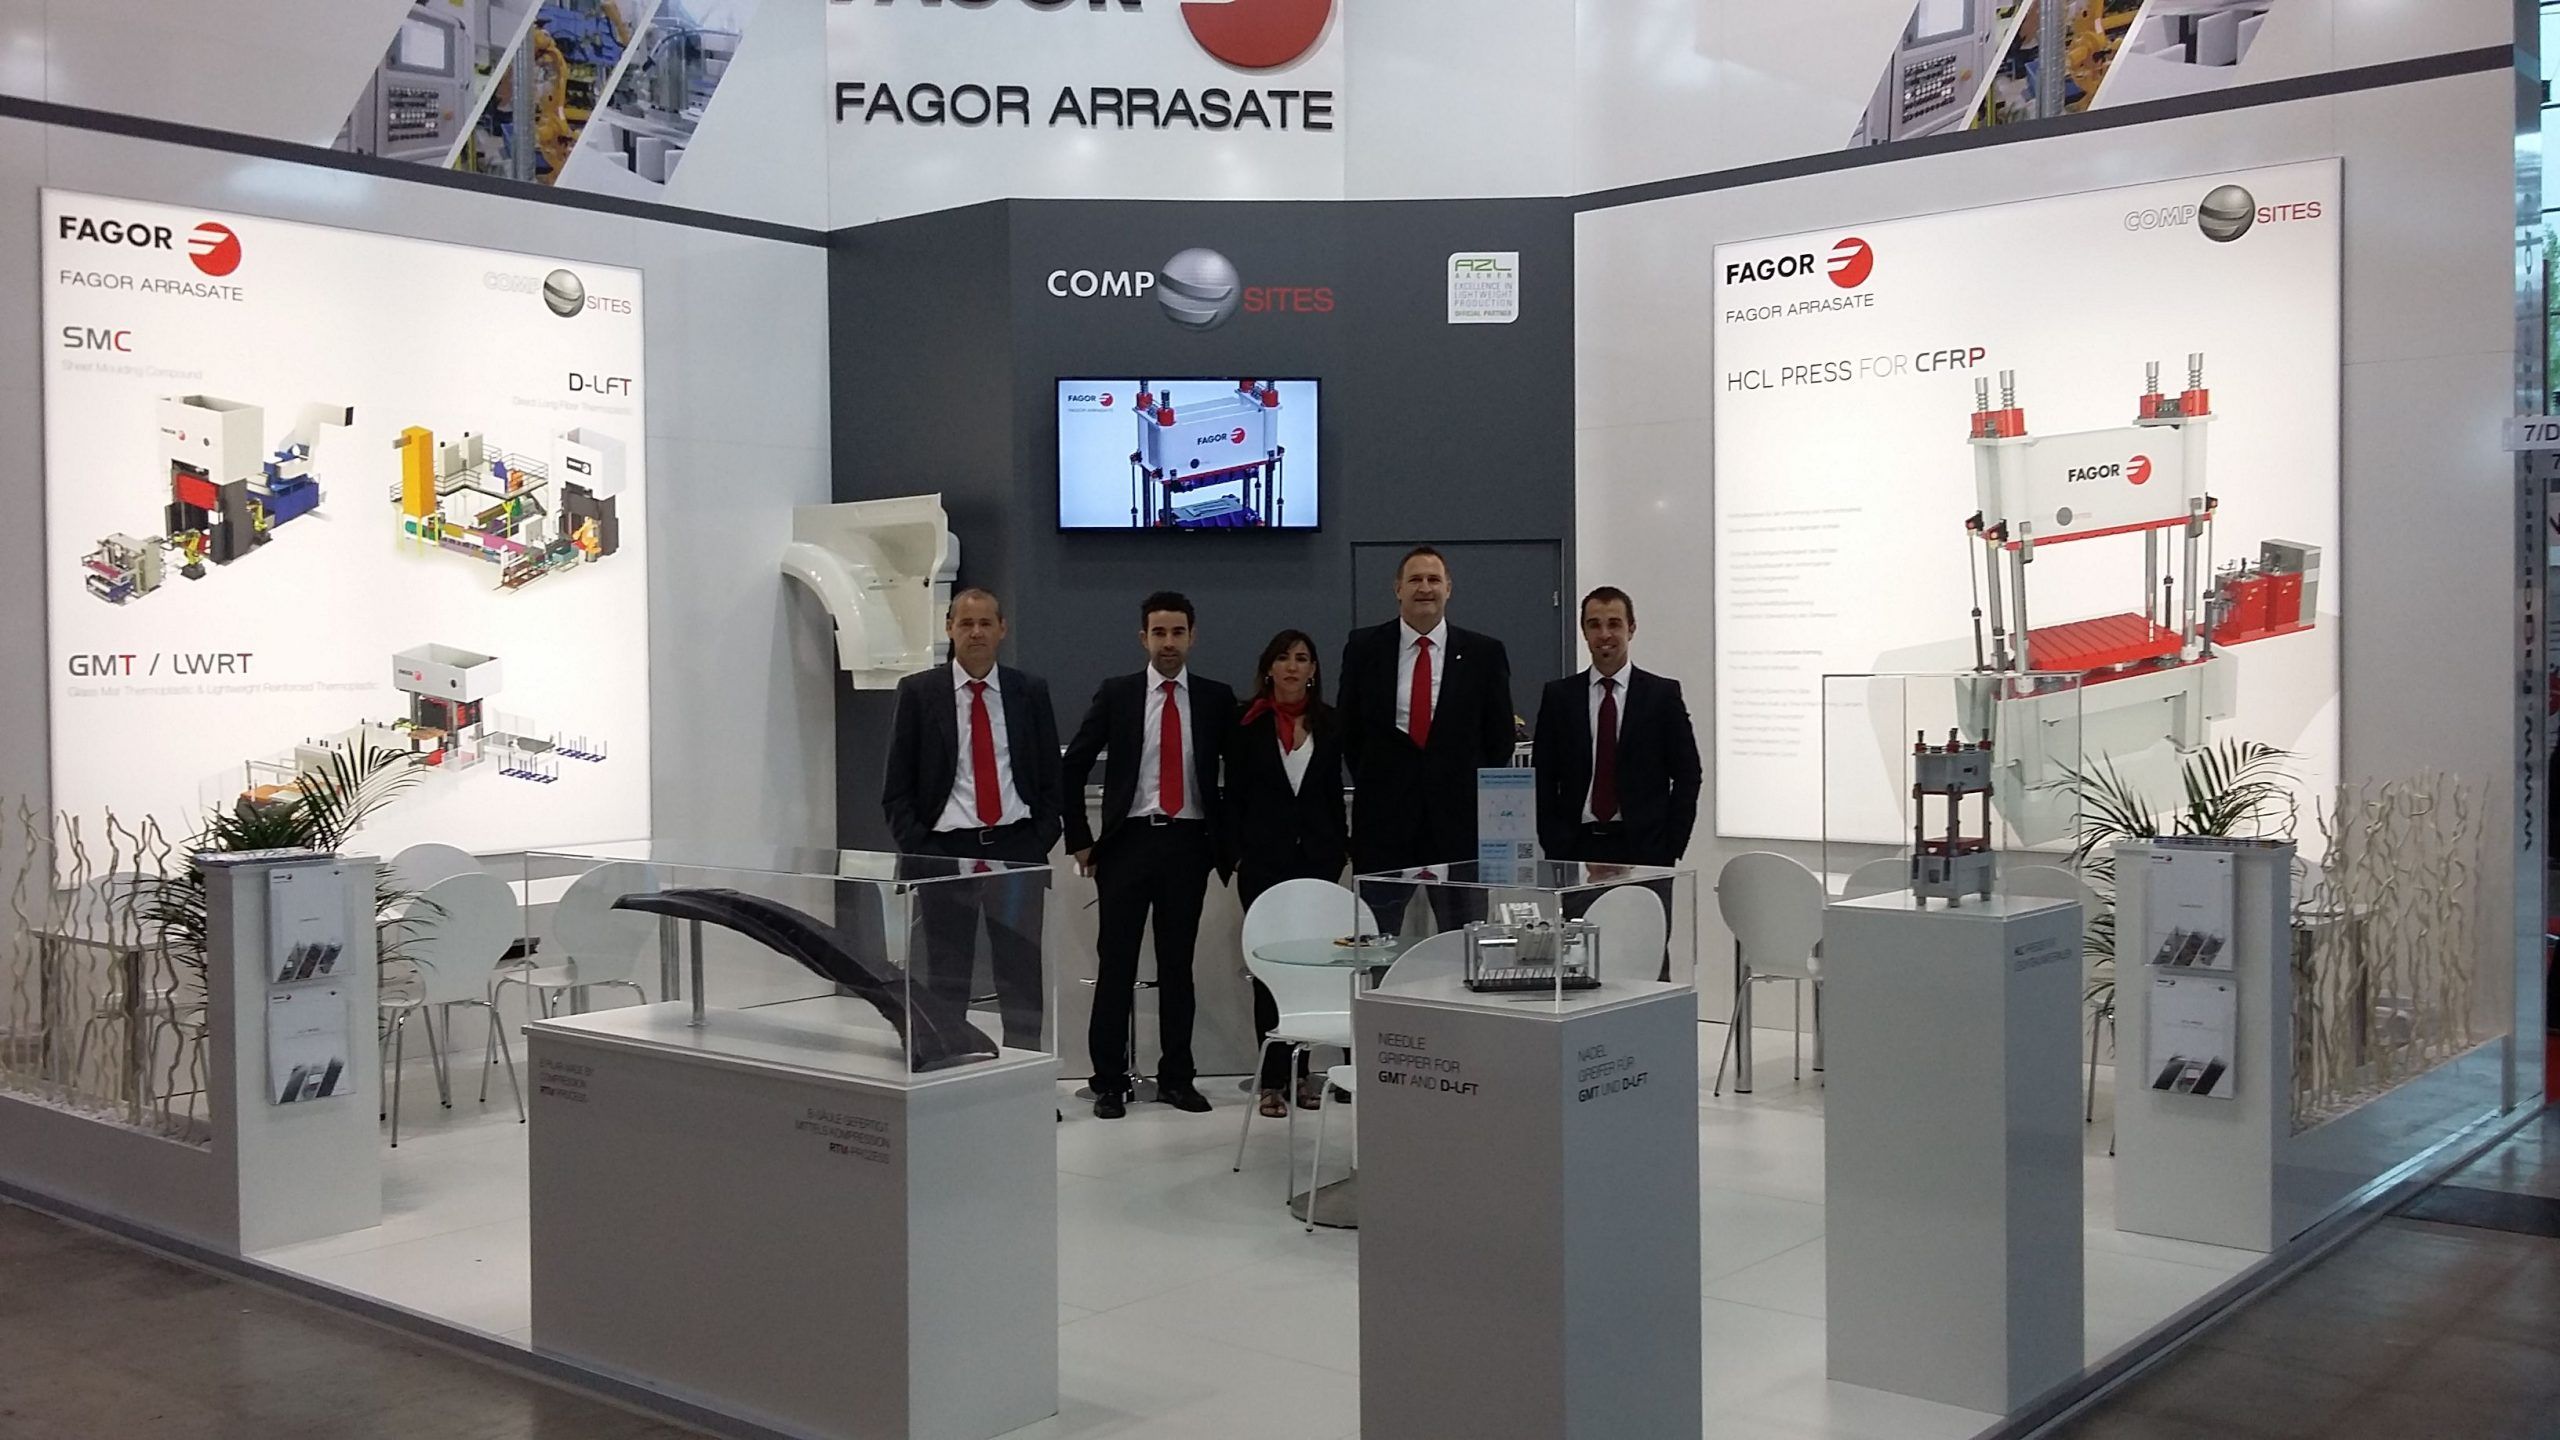 Fagor Arrasate event: IN GERMANY, FAGOR ARRASATE SHOWS ITS KNOW-HOW IN THE COMPOSITES’ FIELD